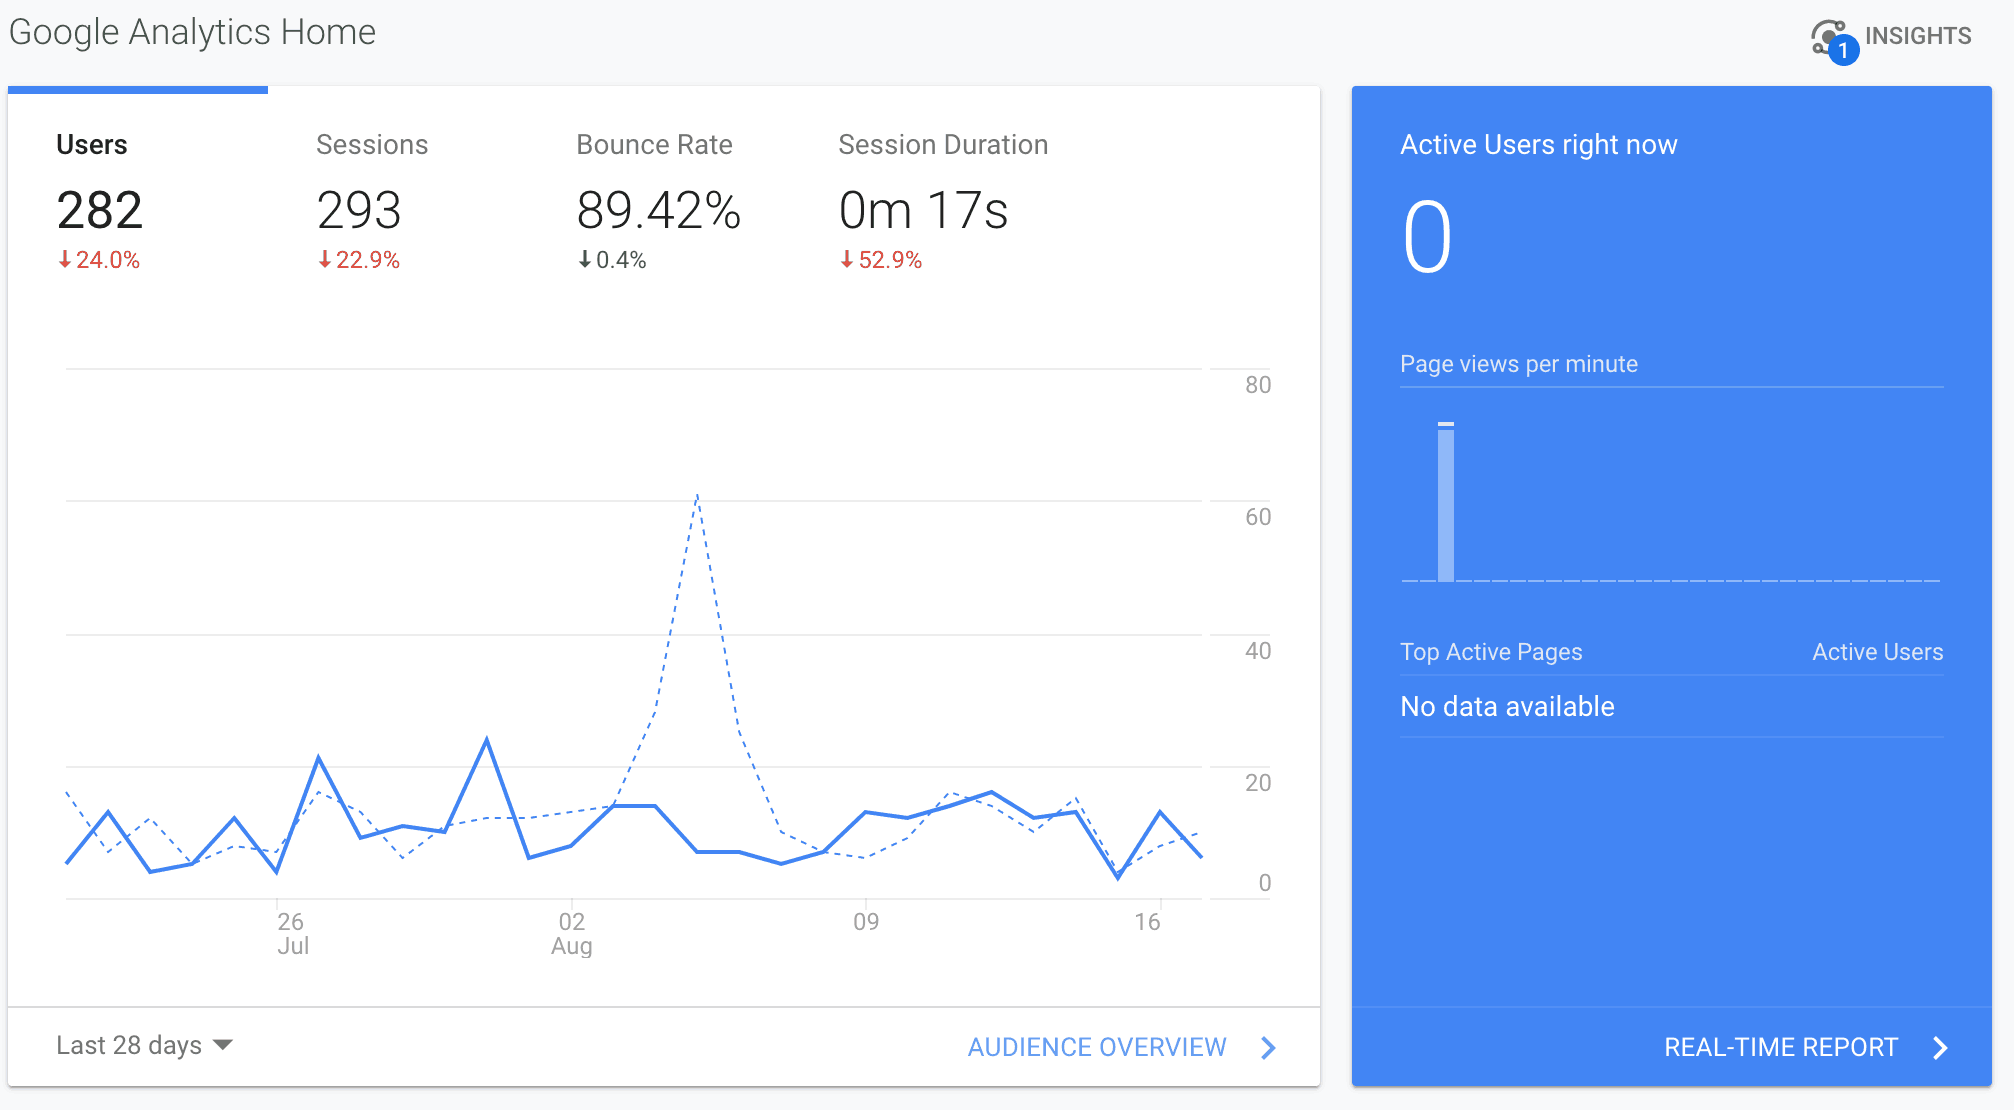 Google Analytics screenshot showing 282 users, 293 sessions, 89.42% bounce rate and 17 seconds as the average session duration